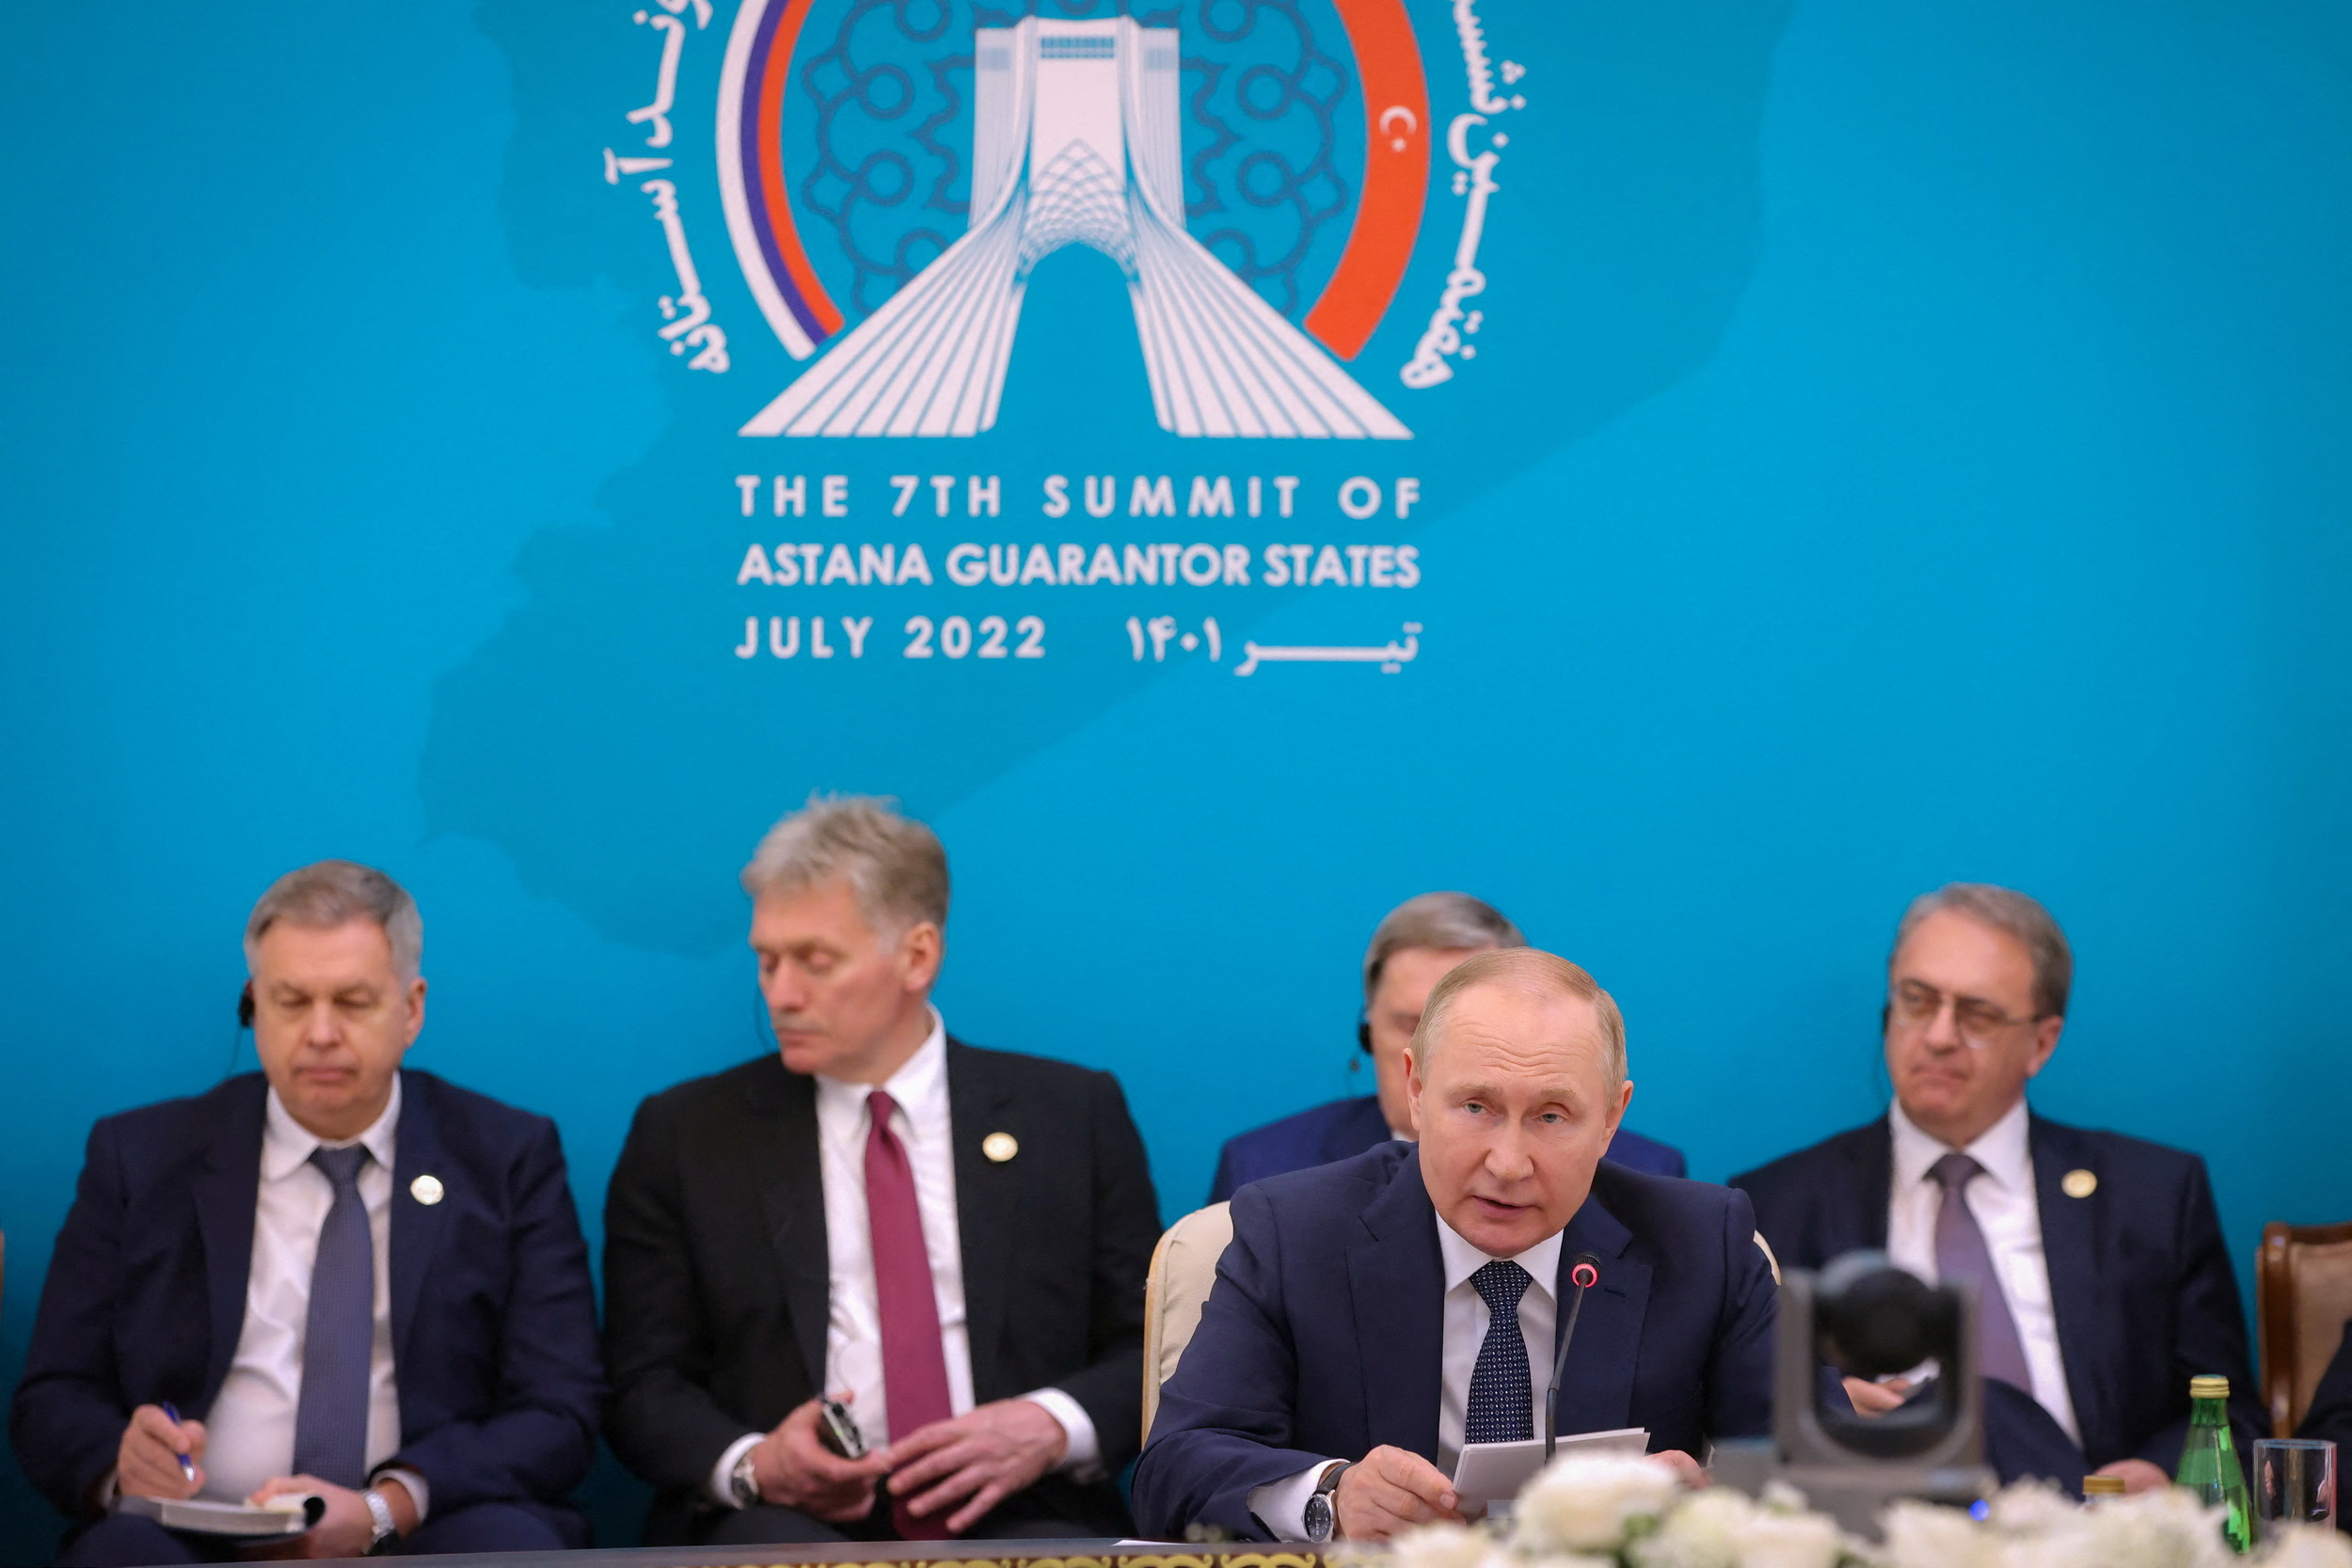 Russian President Vladimir Putin attends a summit of leaders from the guarantor states of the Astana process, designed to find a peace settlement in the Syrian conflict, in Tehran